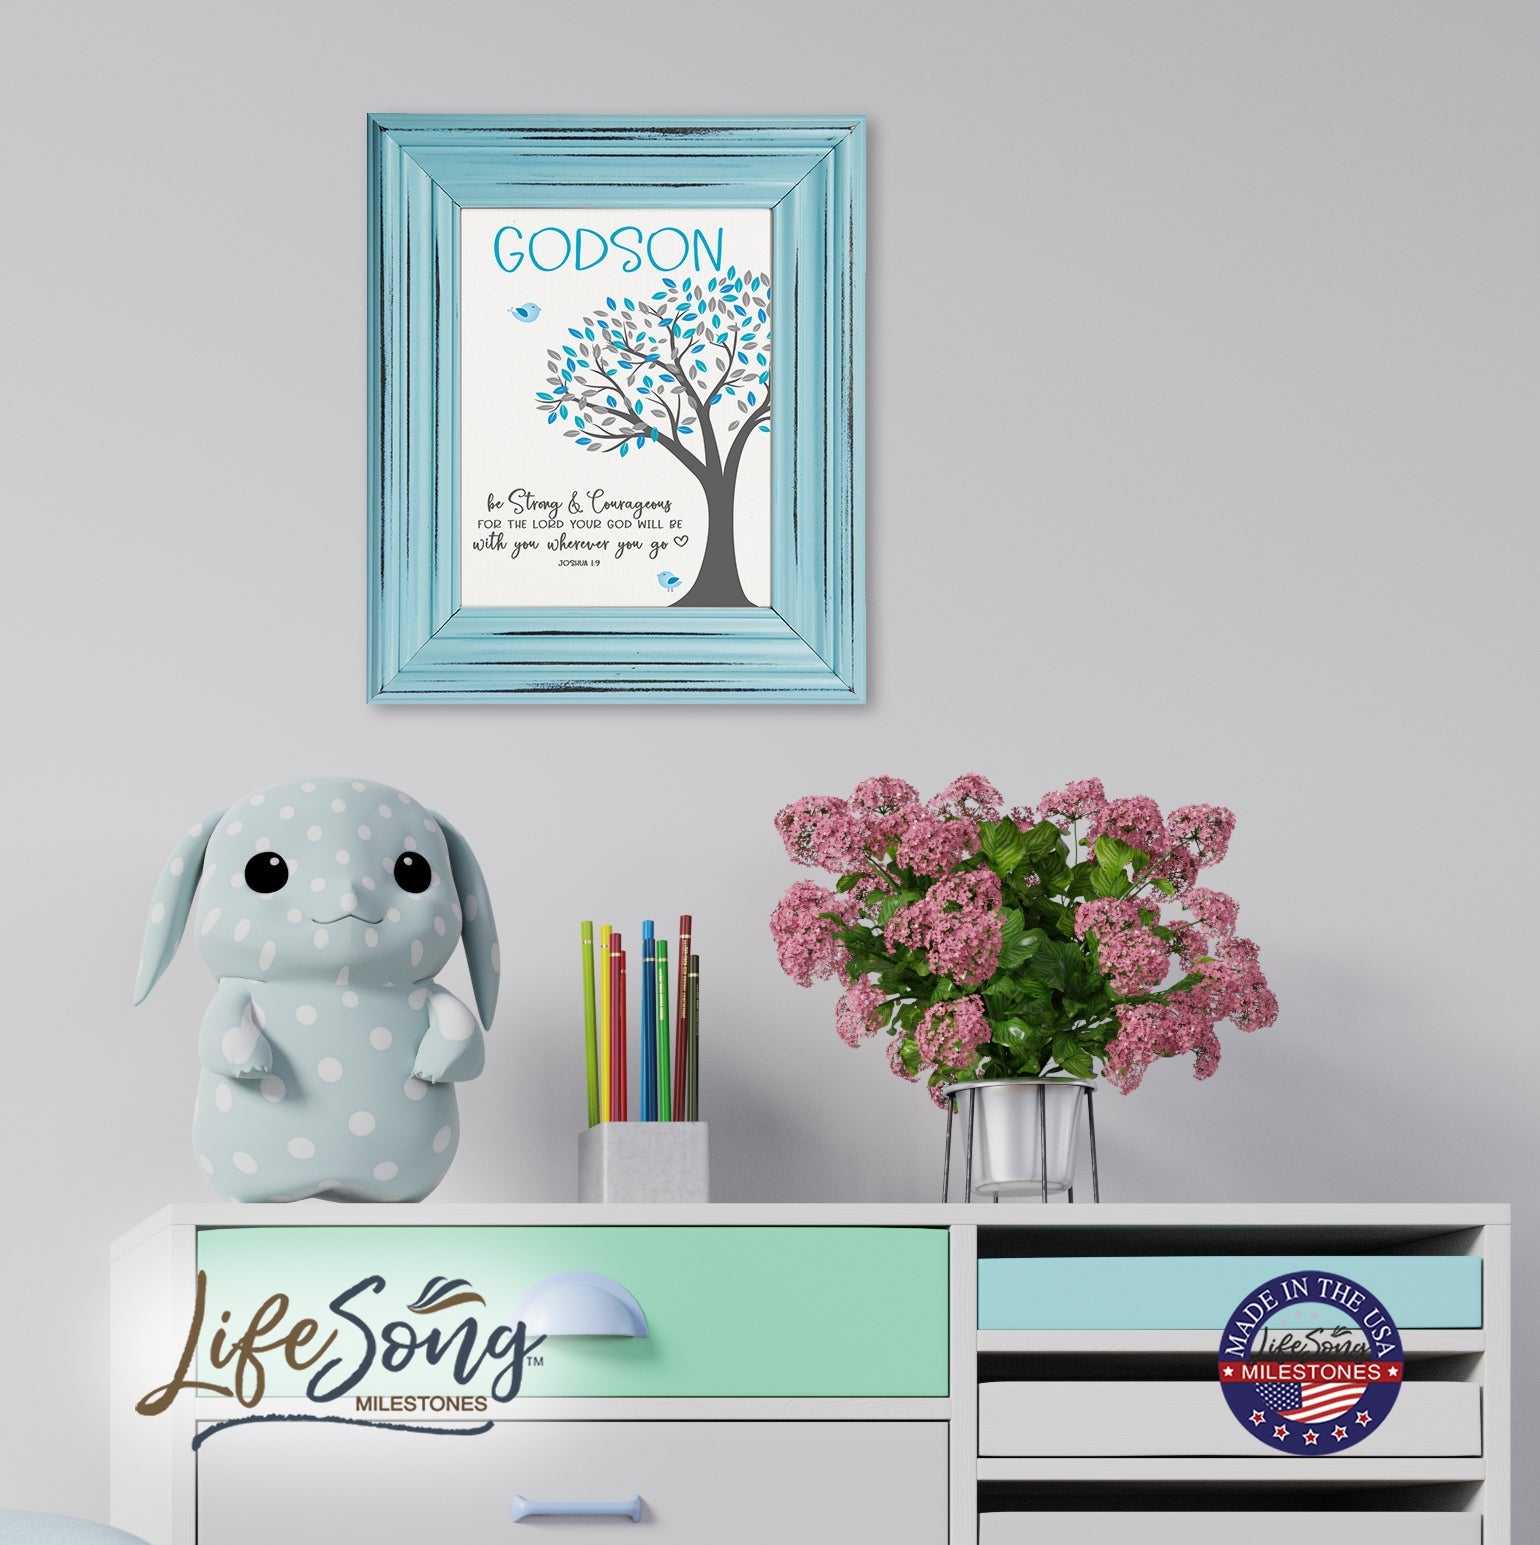 Lifesong Milestones Baptism Framed Wall Decor Signs Gifts For Boys and Girls